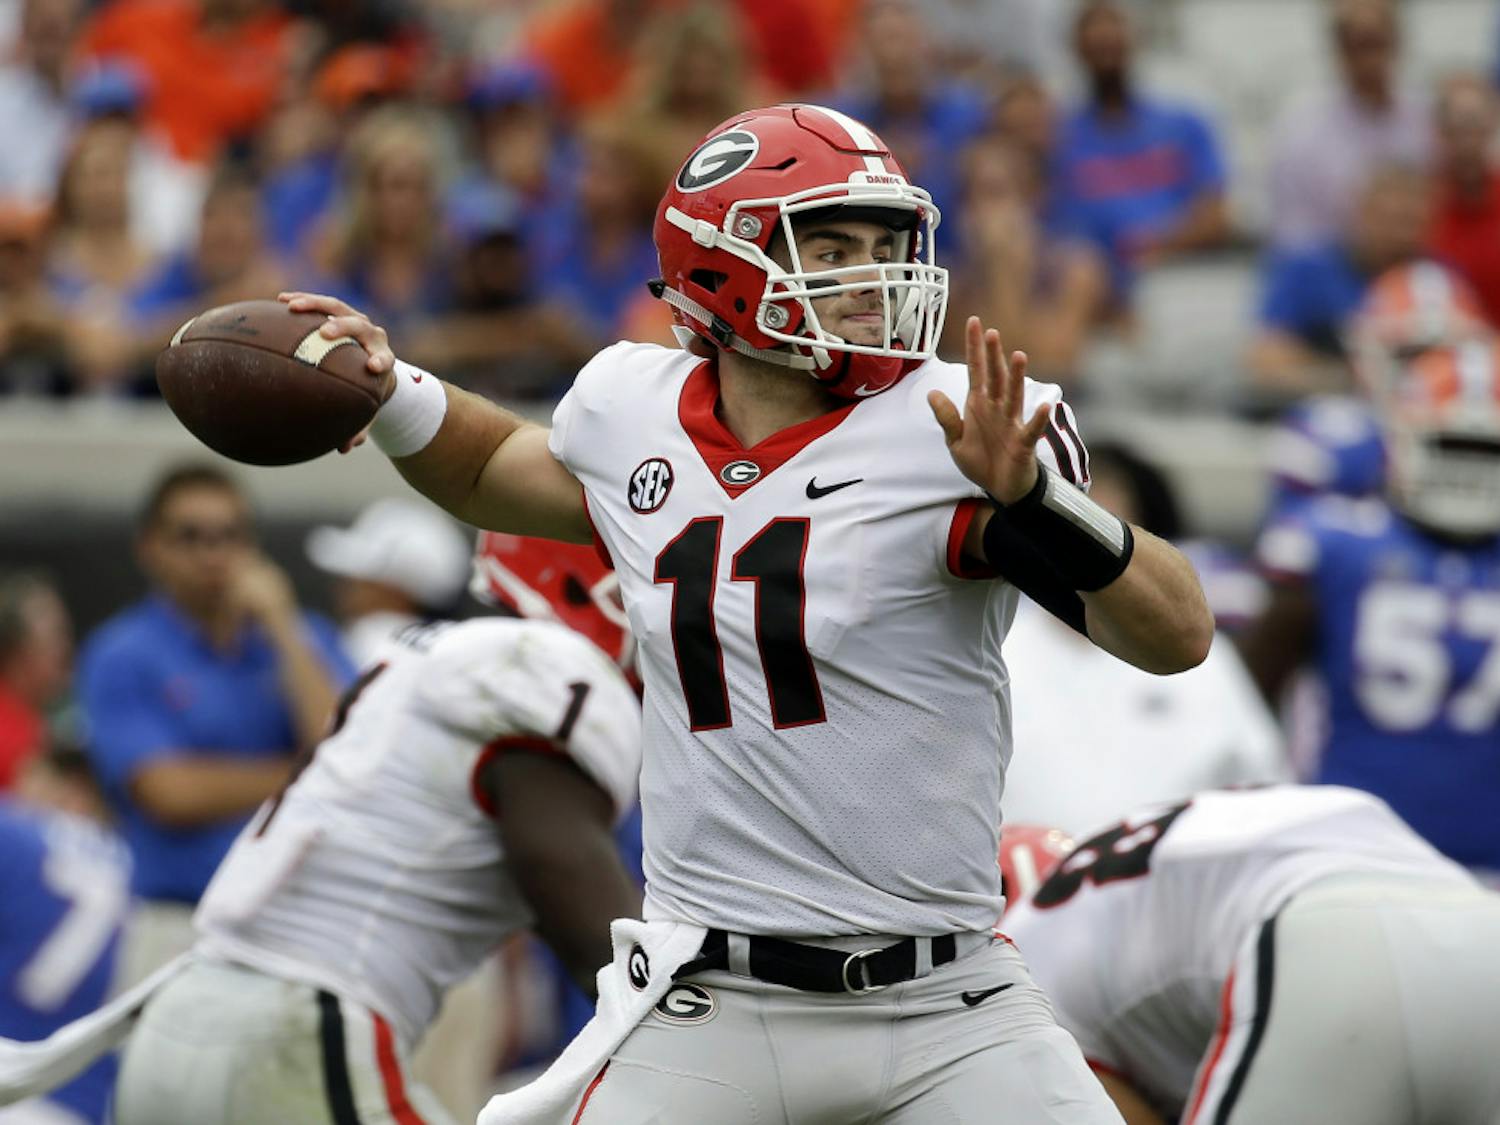 Georgia quarterback Jake Fromm (11) throws a pass against Florida in the first half of an NCAA college football game, Saturday, Oct. 28, 2017, in Jacksonville, Fla. (AP Photo/John Raoux)